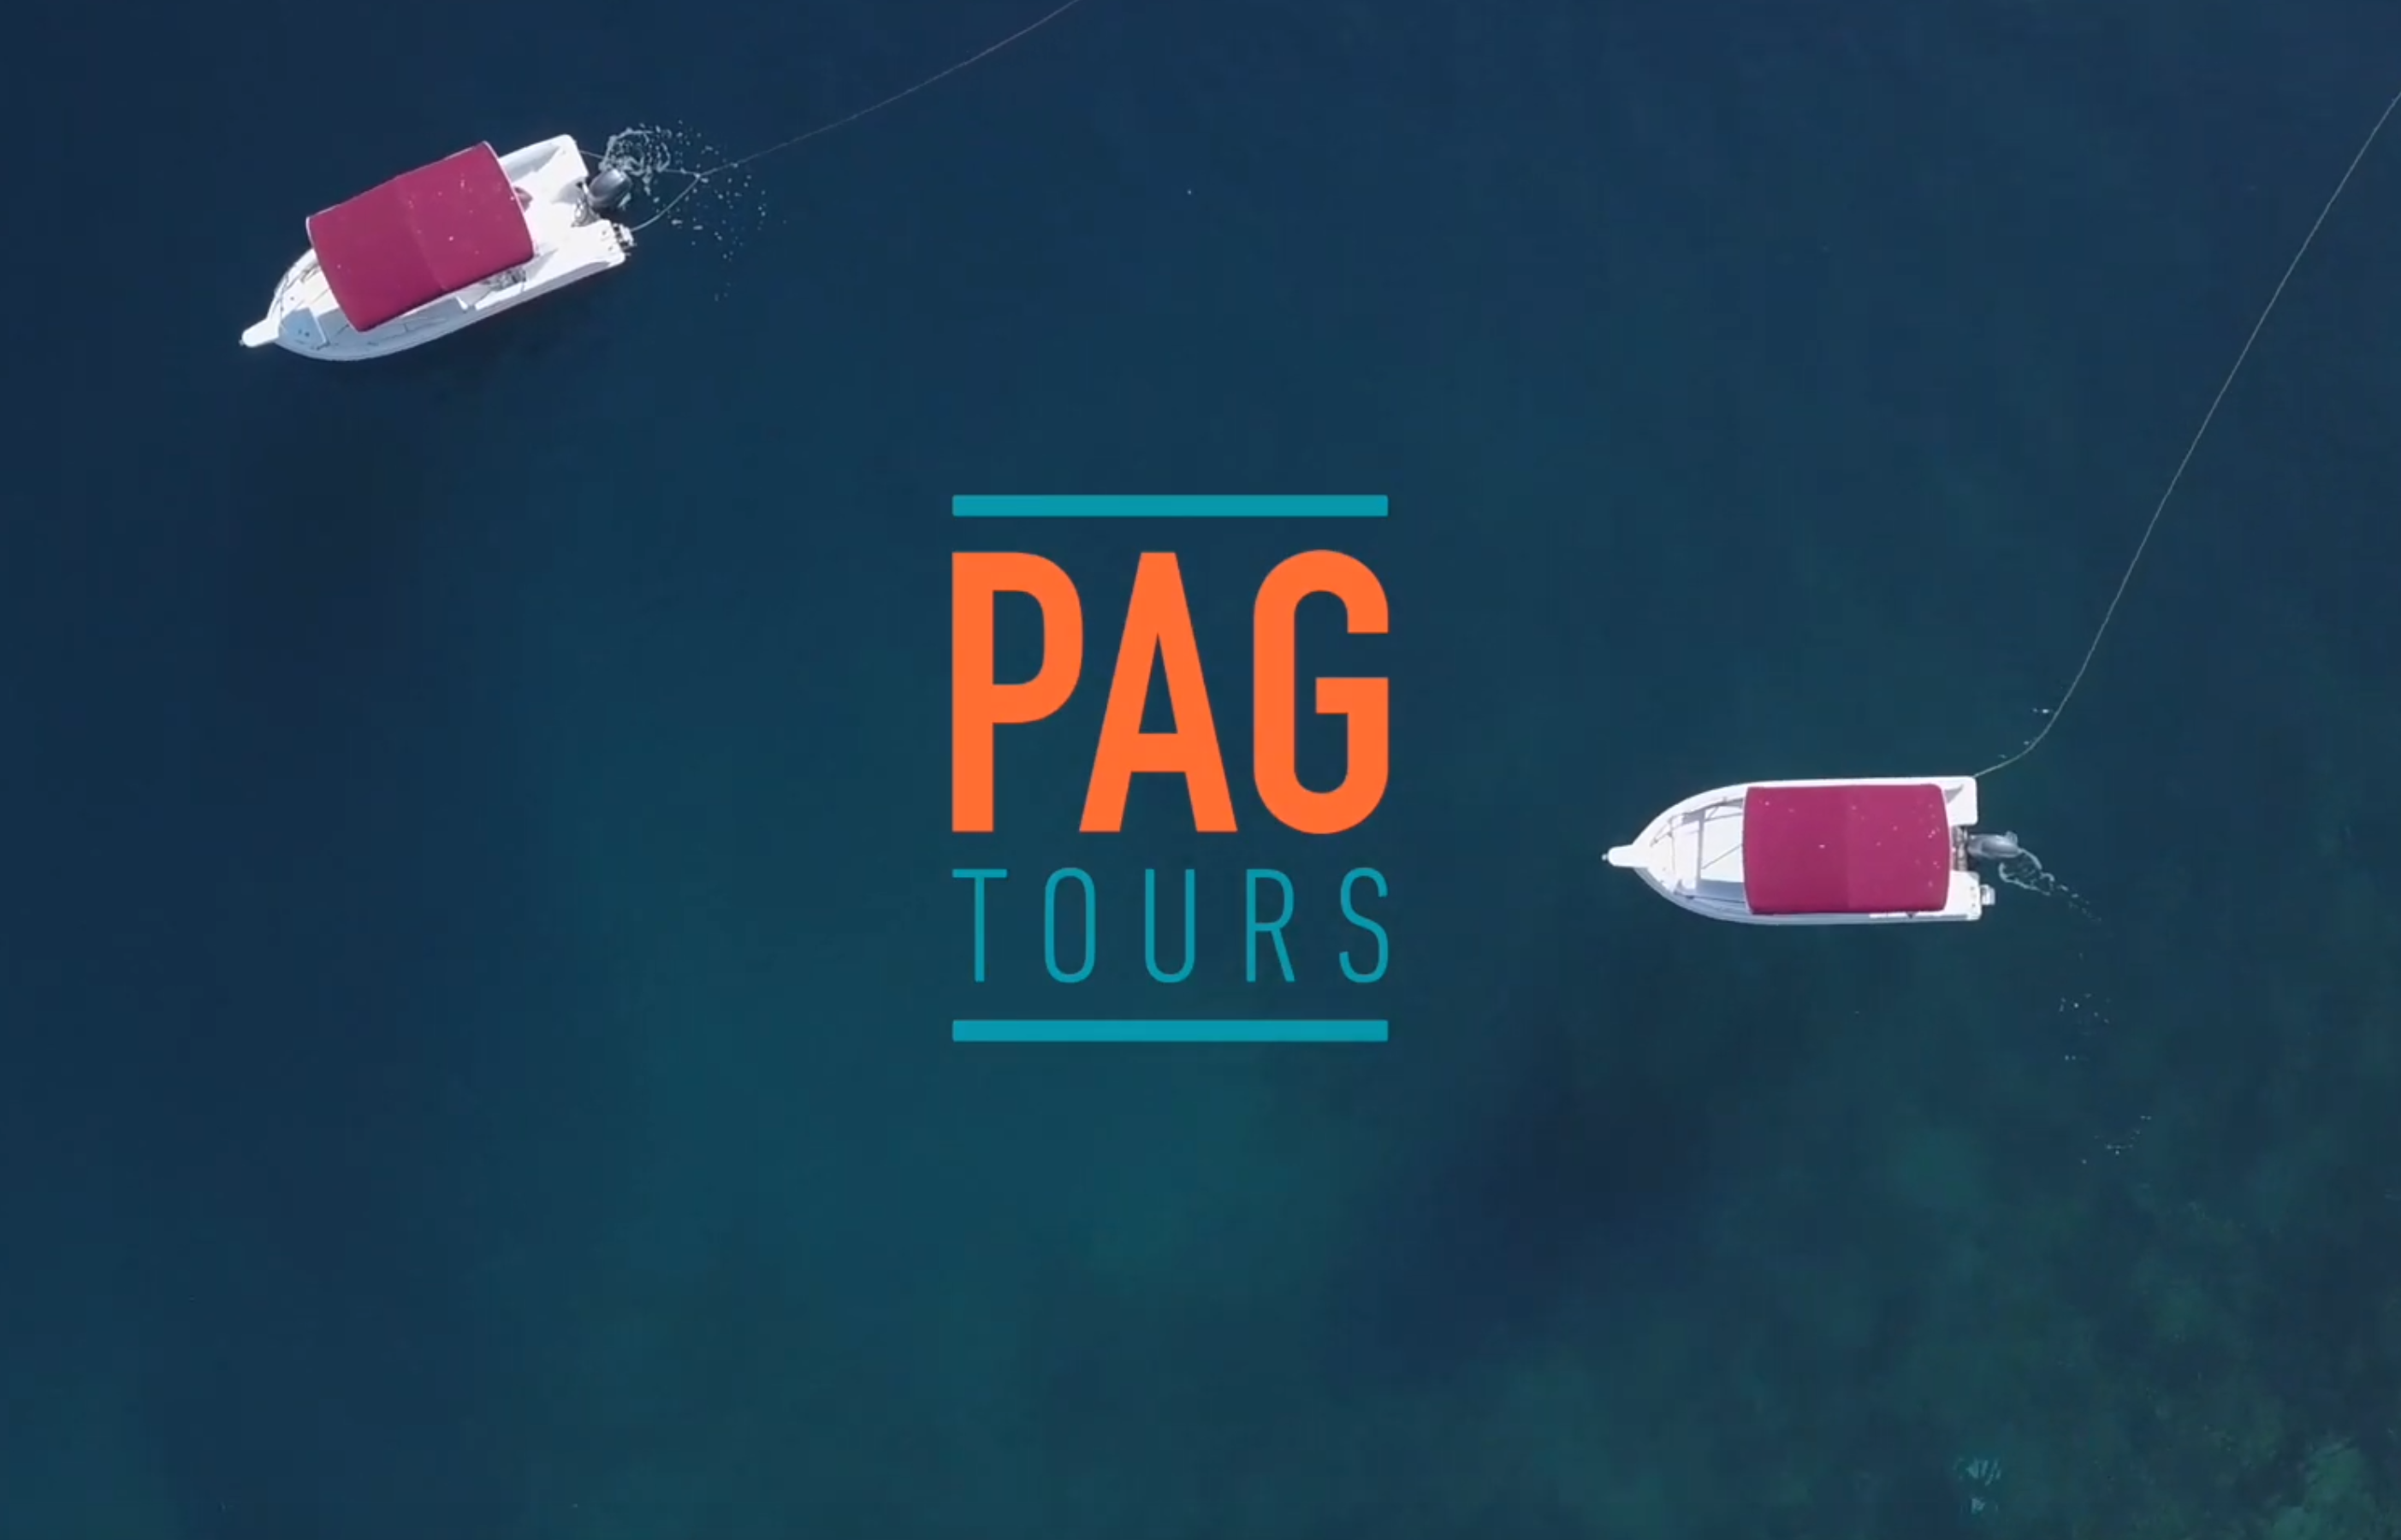 Pag Tours - boat rental - Discover island Pag, explore beautiful coast and have a mesmerizing experience. We will show you the hidden caves and amazing beaches of moon island Pag.